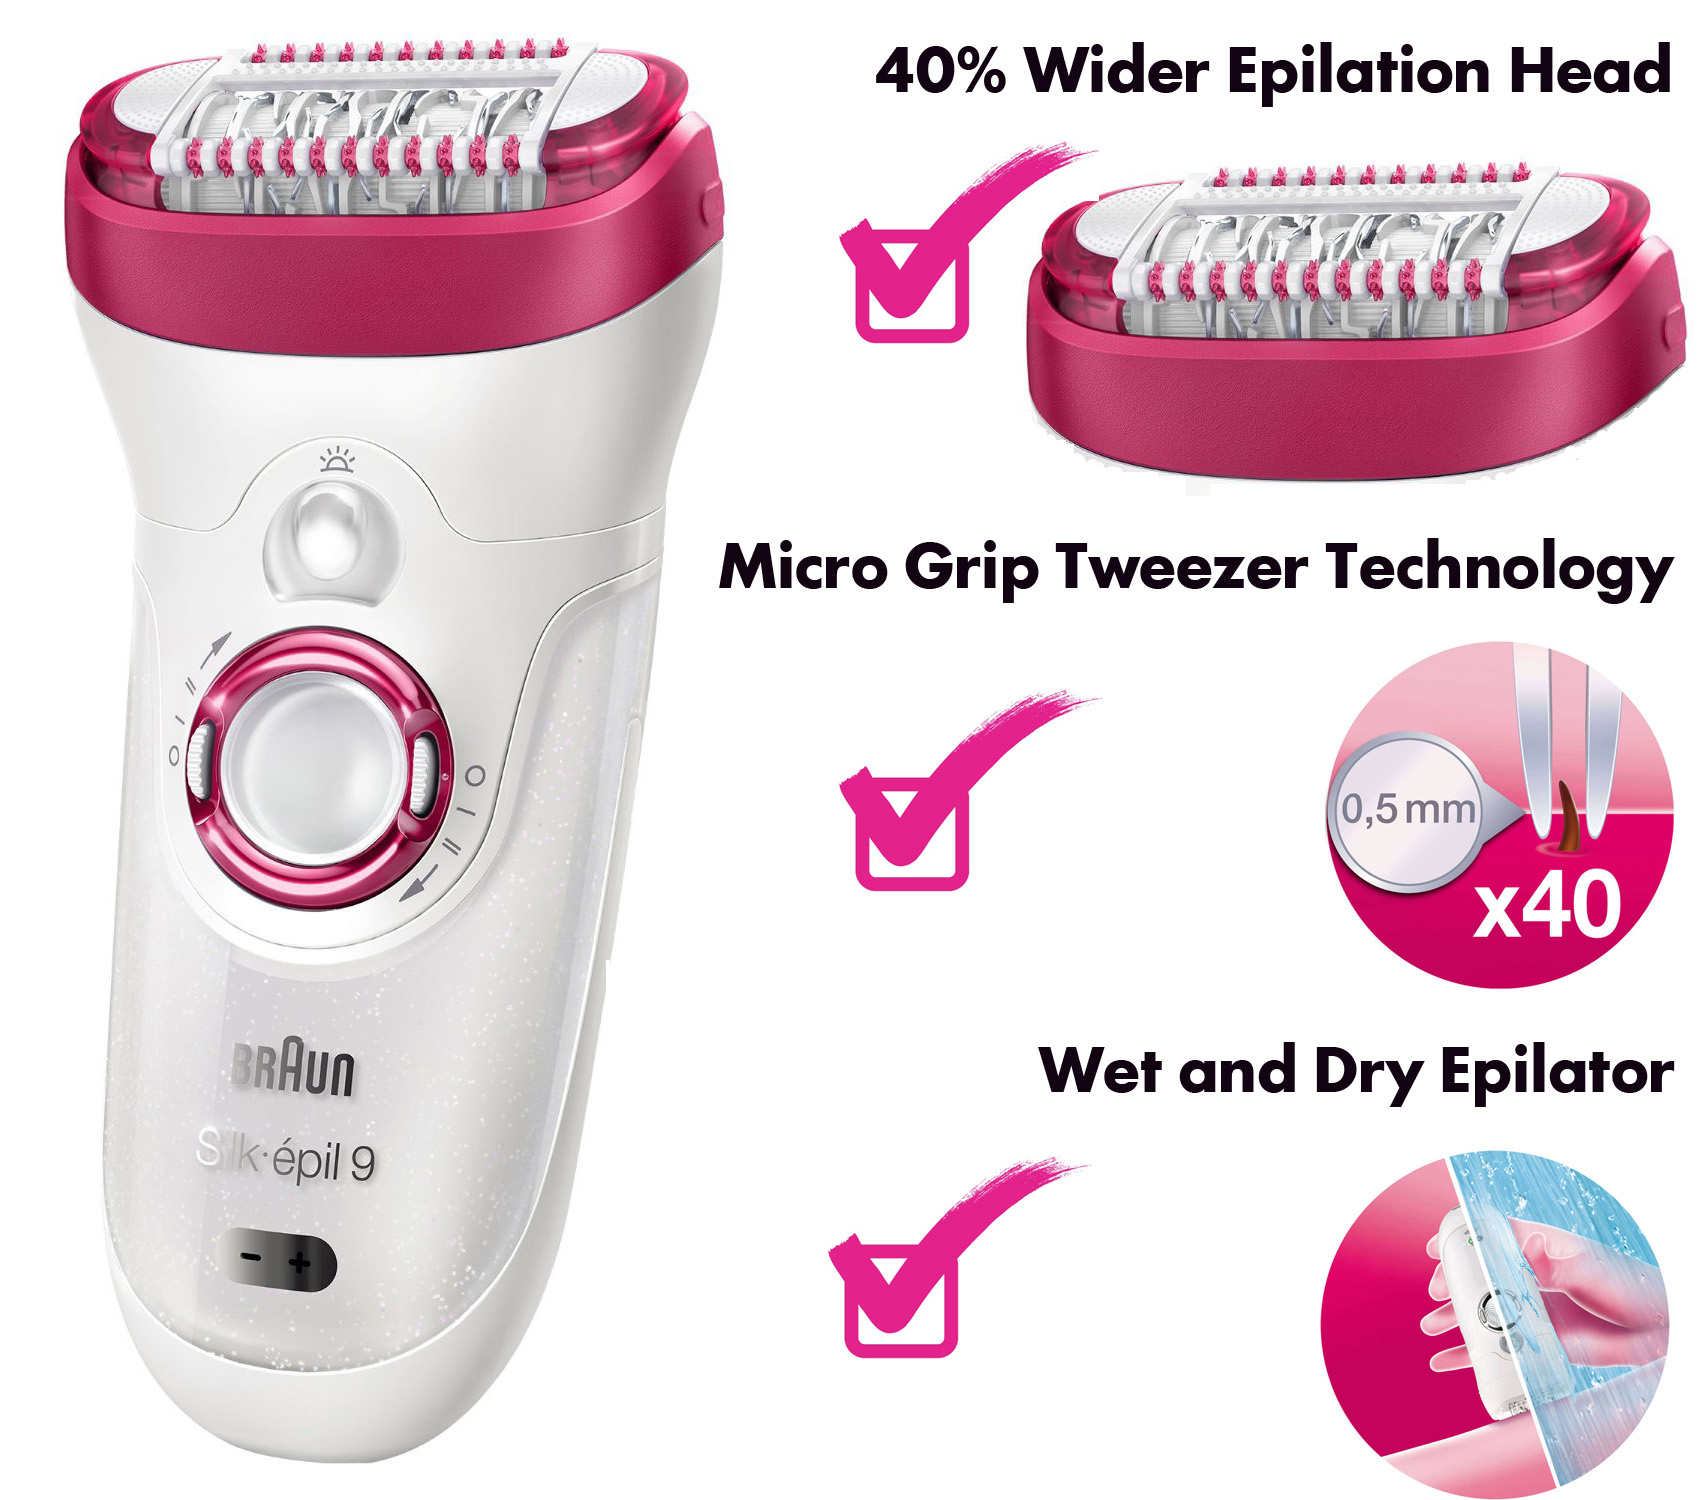 What is the most recommended epilator?